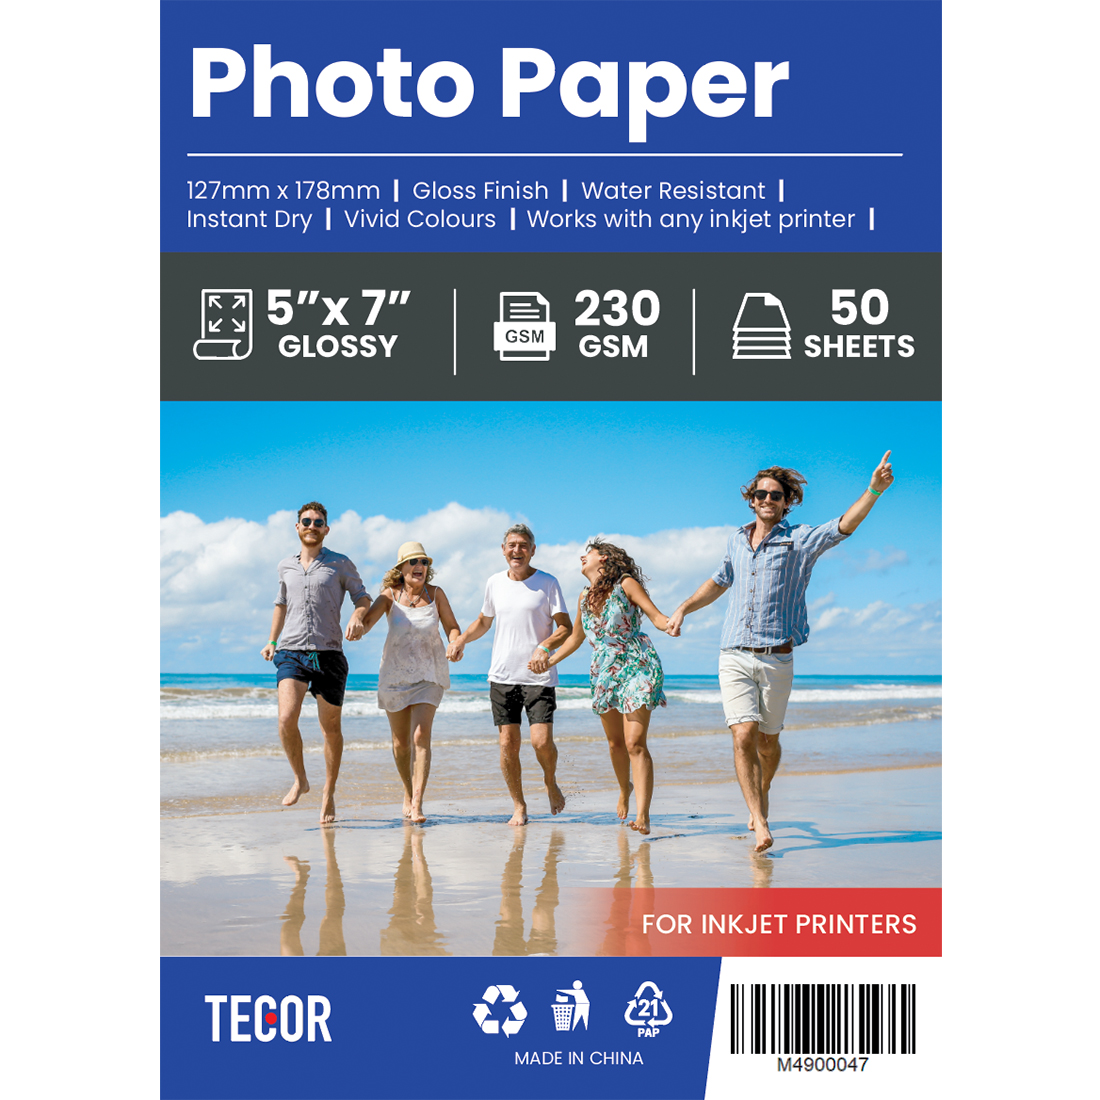 20 SHEETS OF A4 260GSM PHOTO GLOSS PREMIUM INSTANT DRY WATER RESISTANT PAPER 